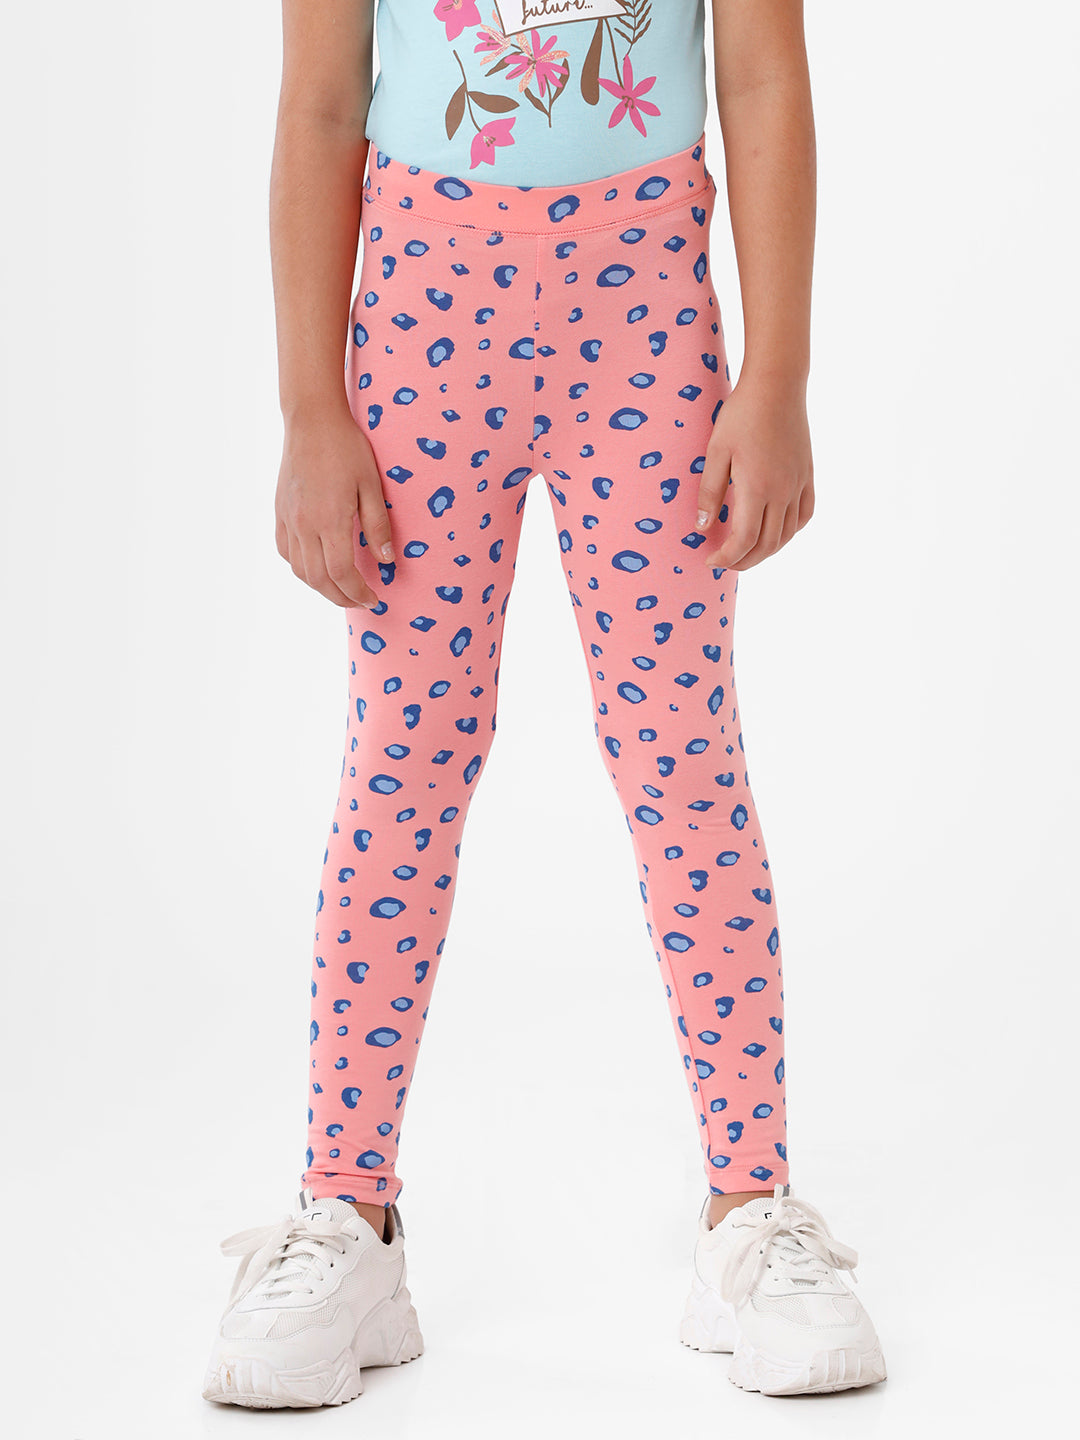 Cute Little Girl Leggings | International Society of Precision Agriculture